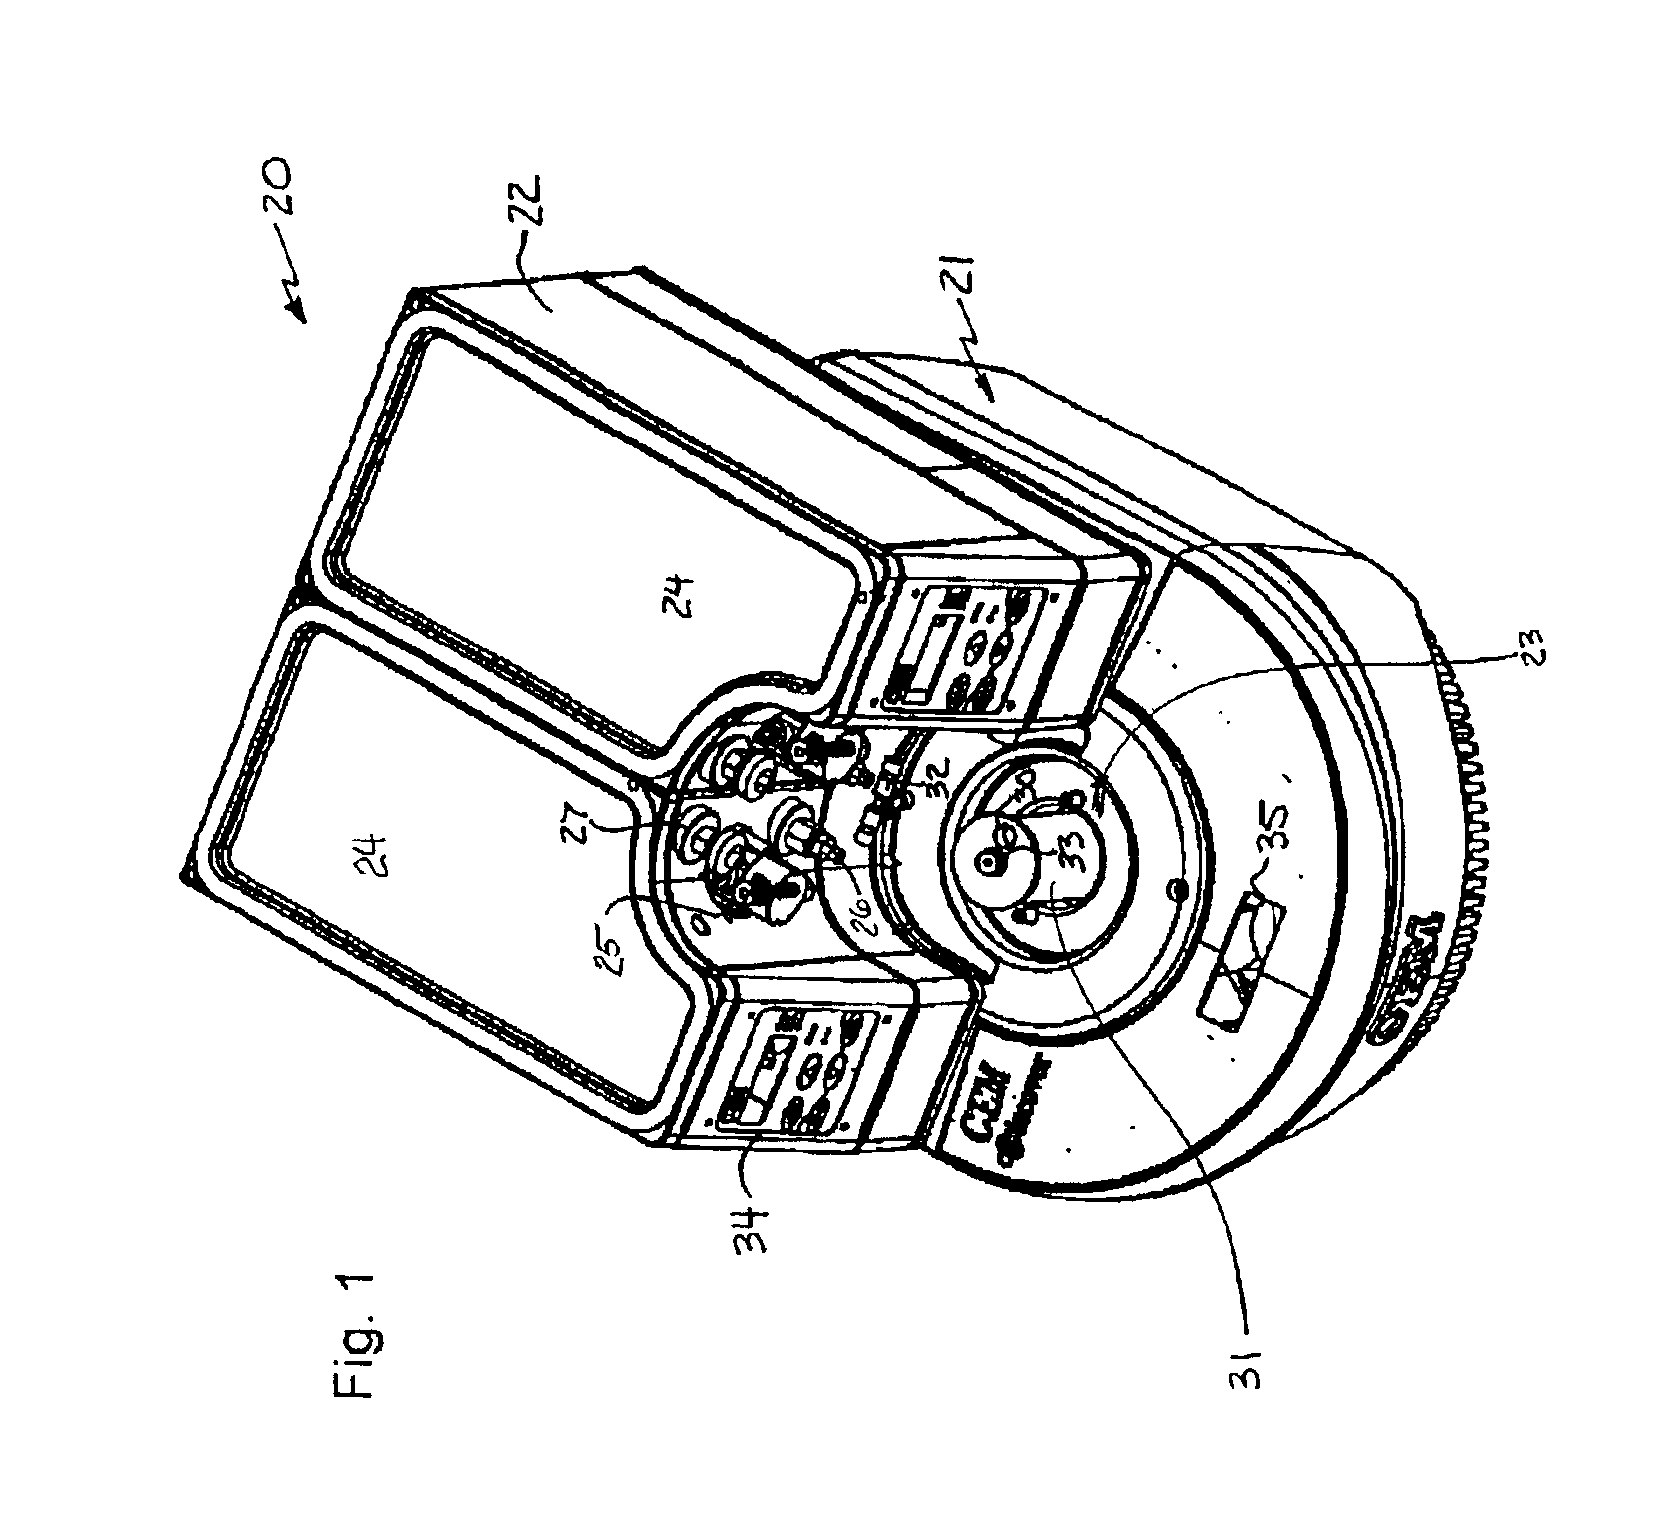 Method and apparatus for continuous flow microwave-assisted chemistry techniques